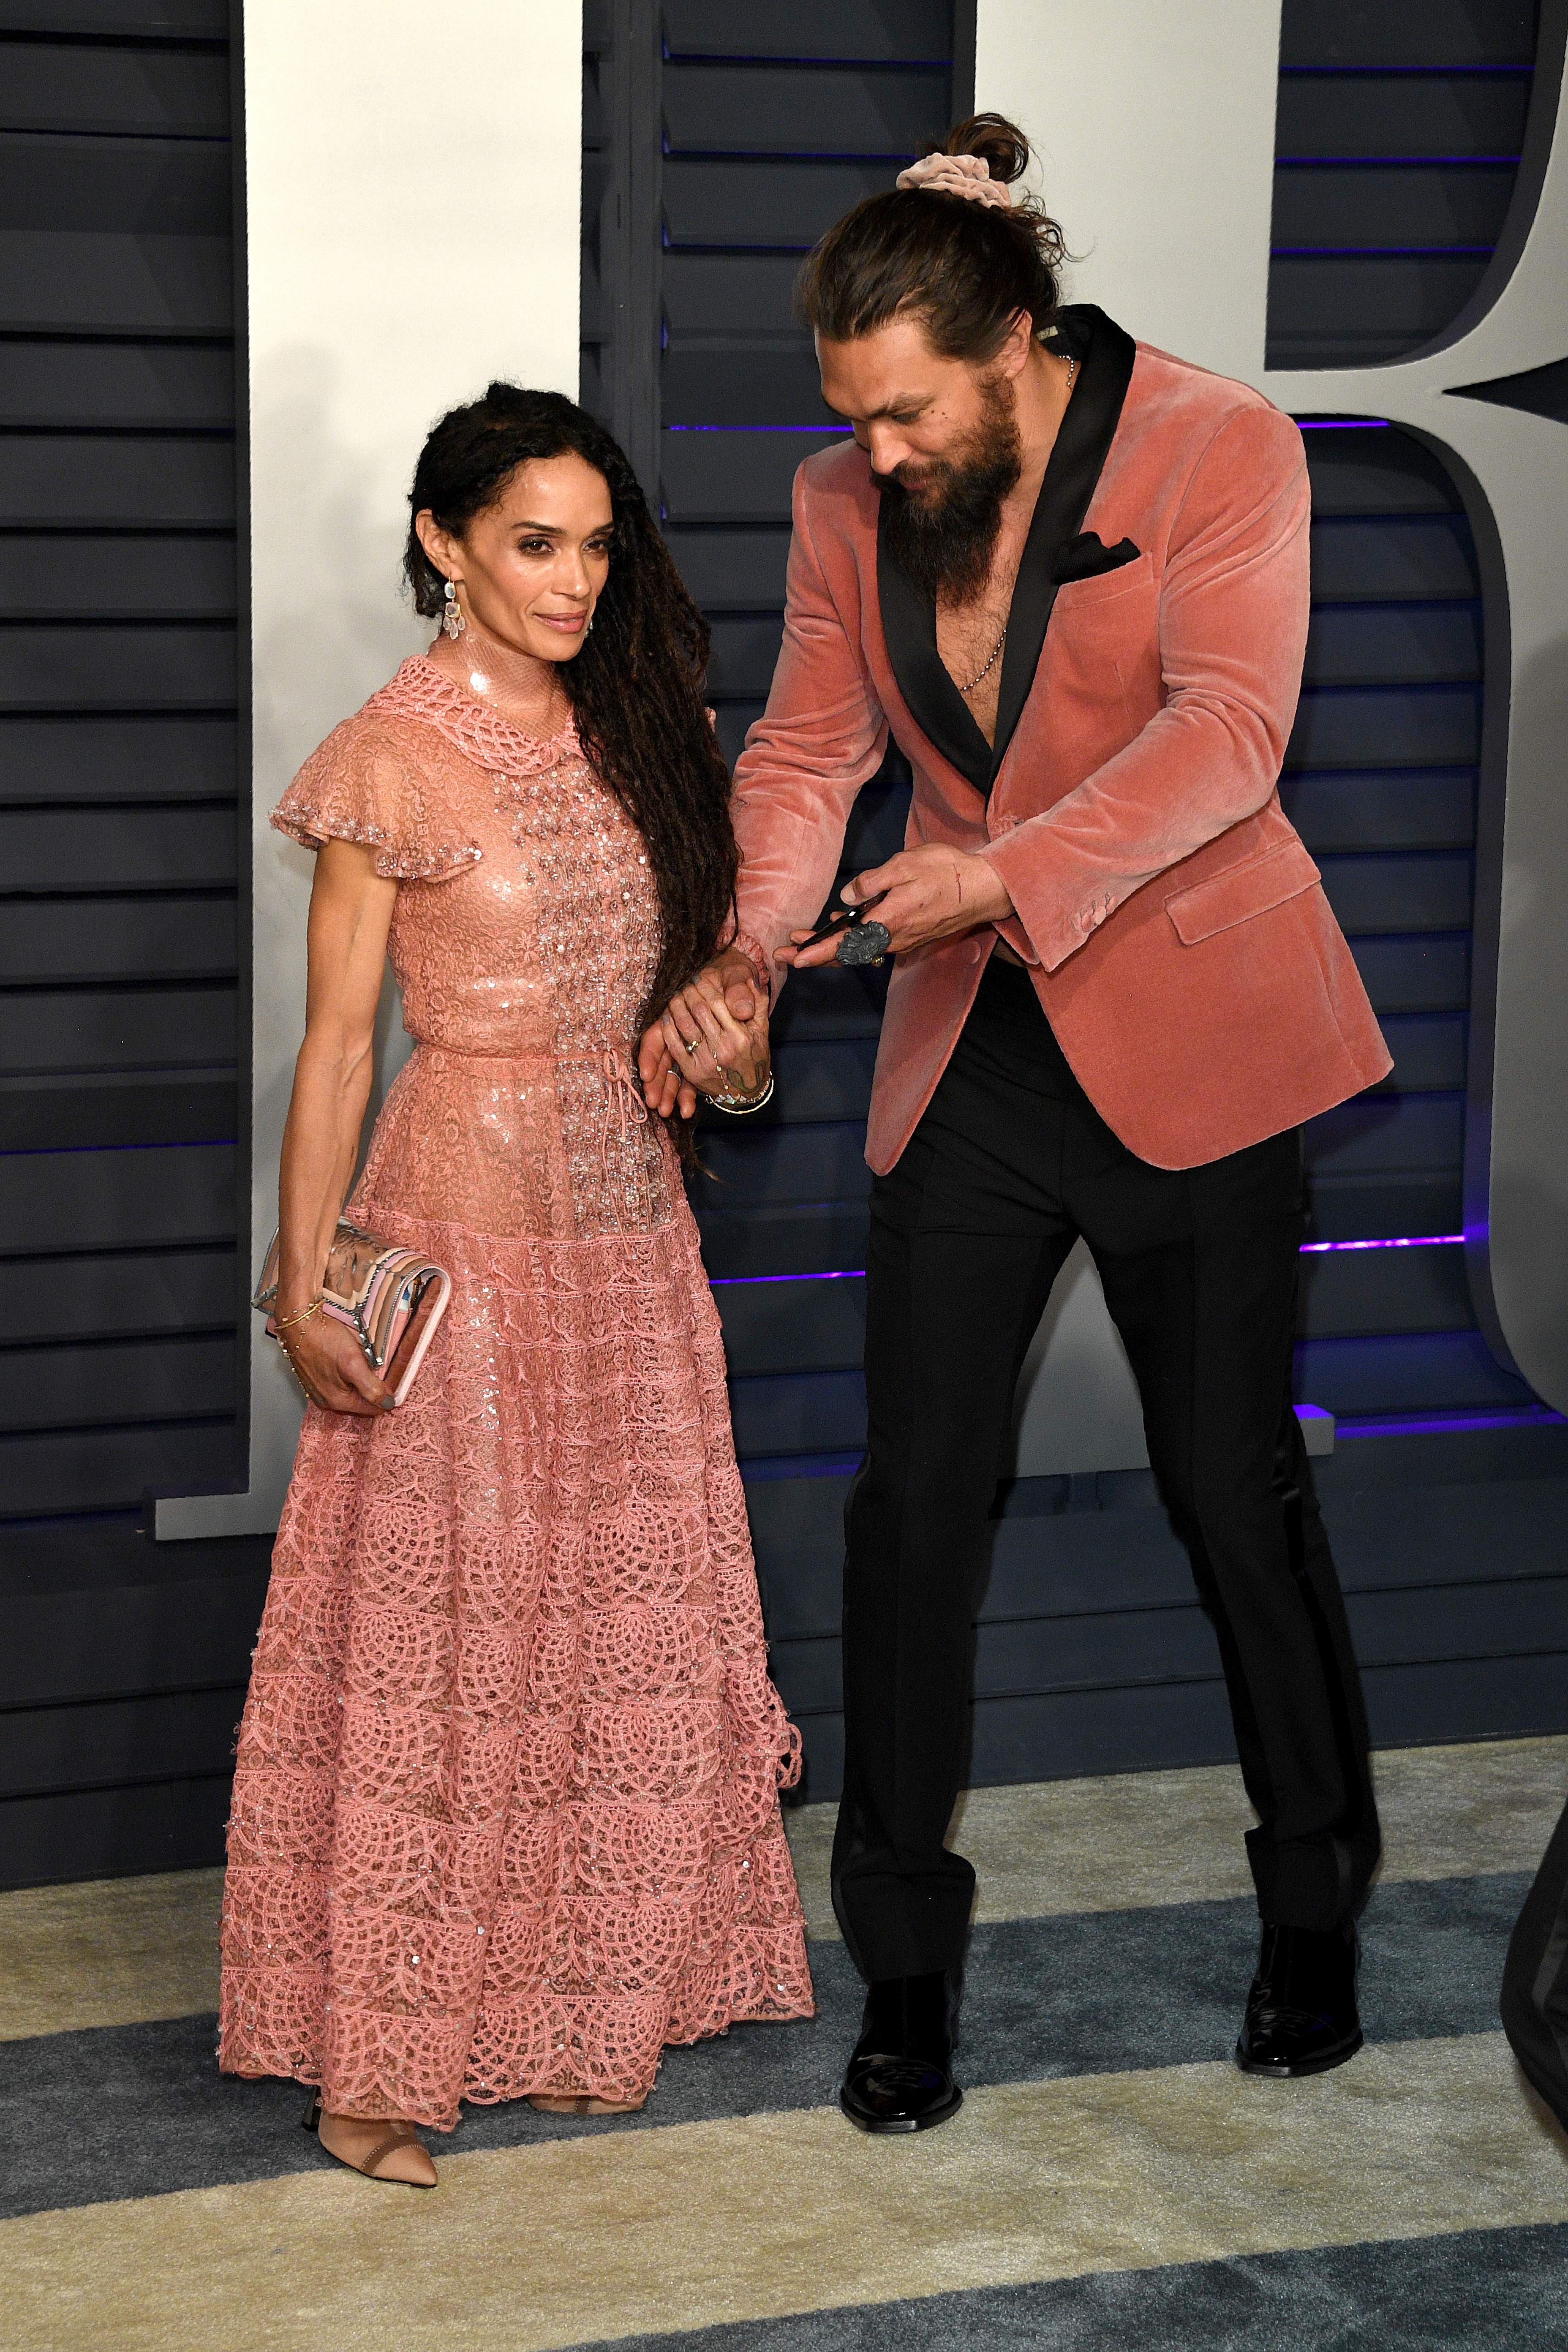 Jason Momoa and Lisa Bonet attend the 2019 Vanity Fair Oscar party on February 24, 2019 in Beverly Hills, California | Source: Getty Images